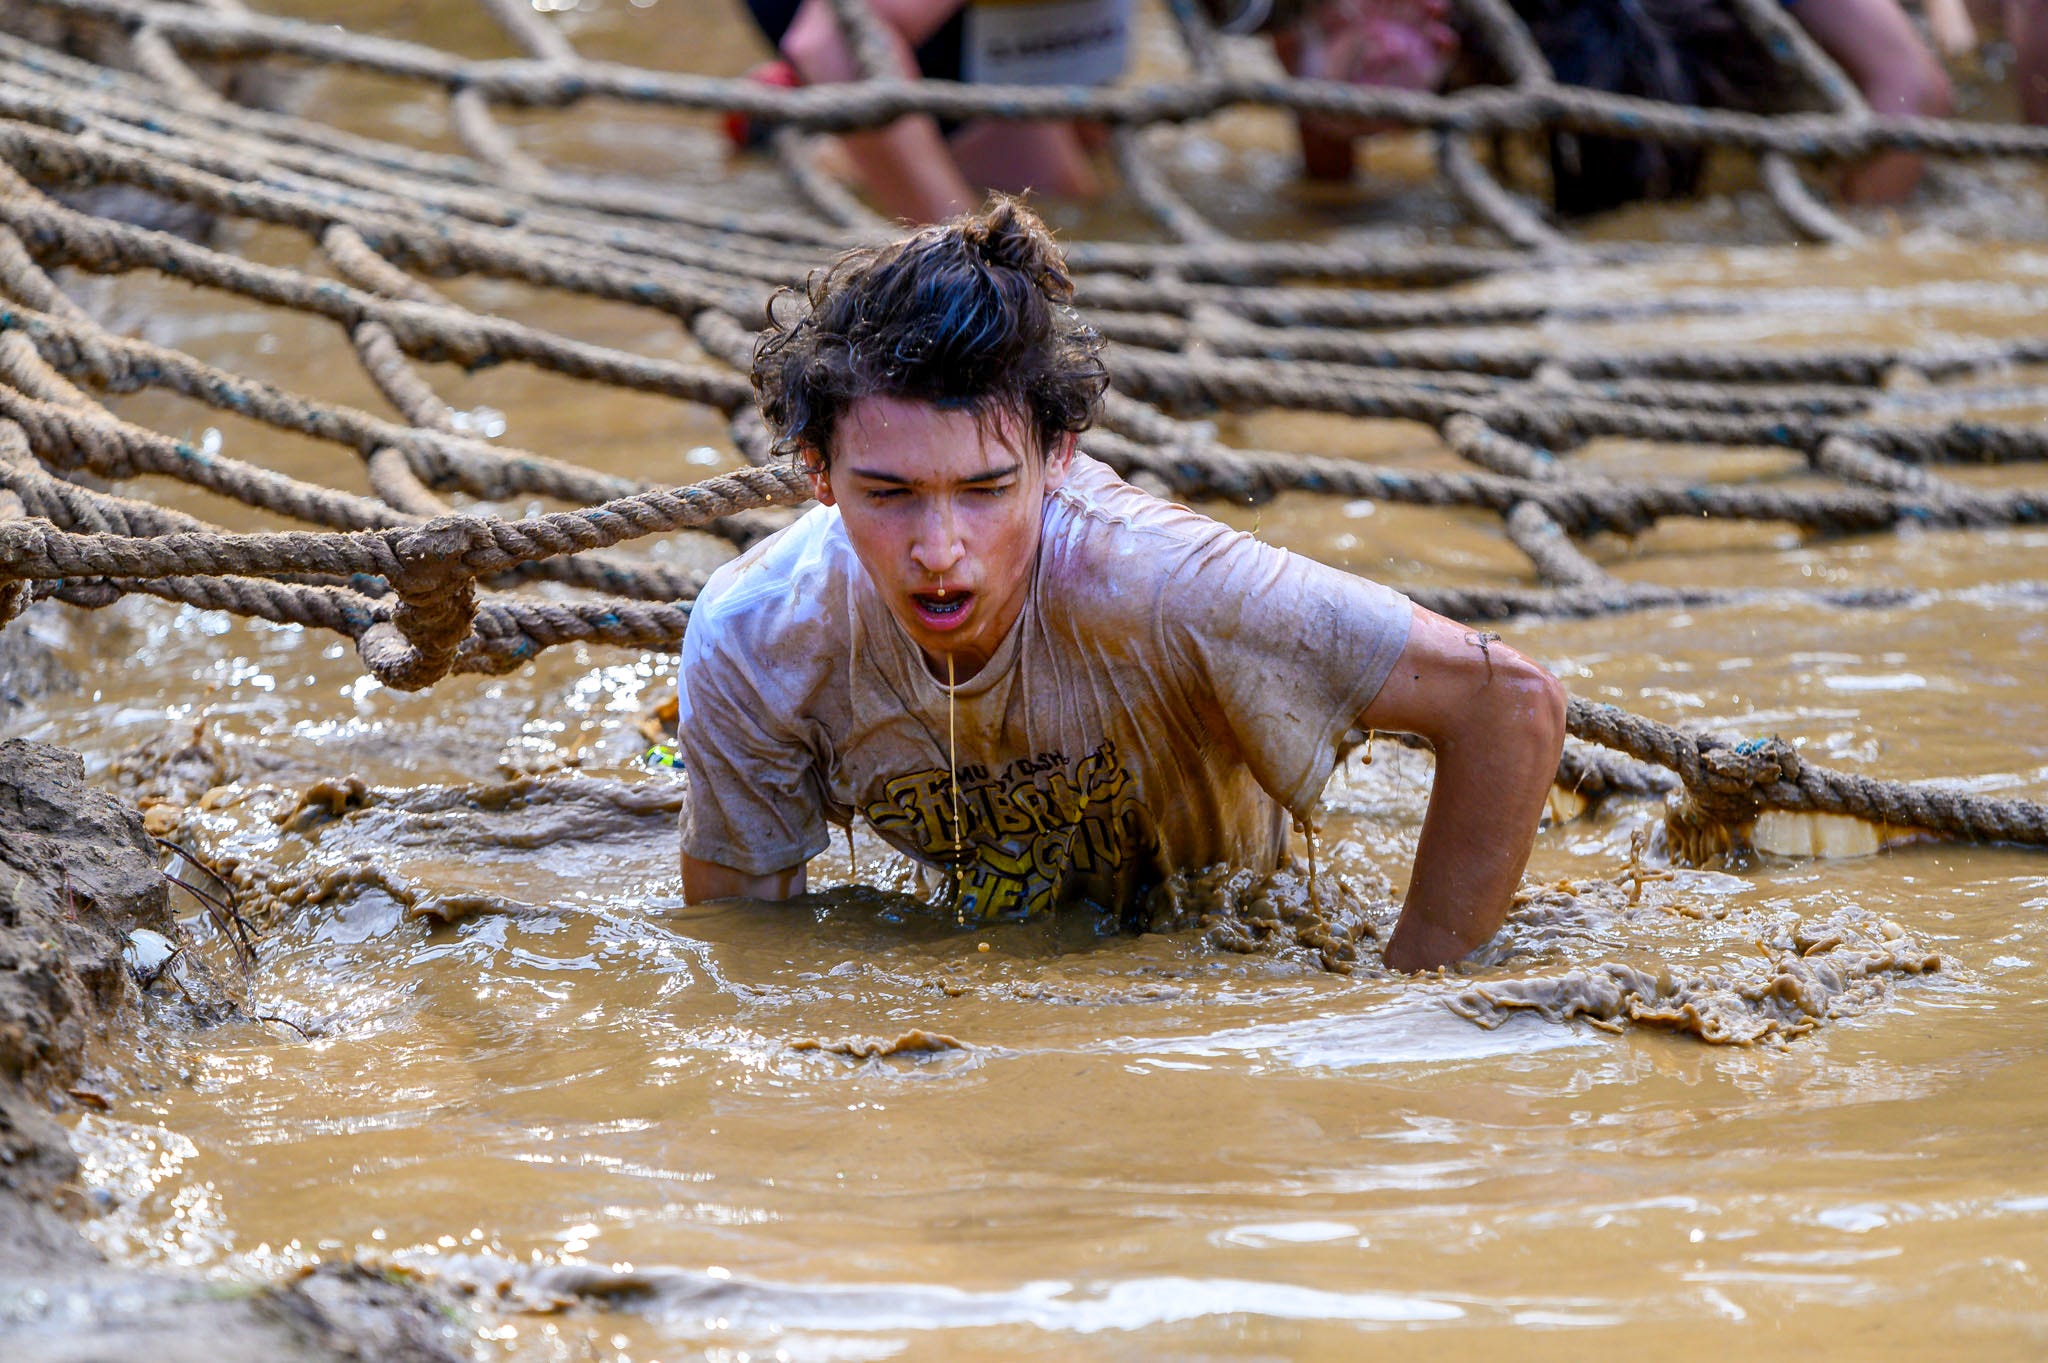 People's Choice winner in Candid Captures: "Muddy Dash," by Glen Suszko, of Shelby Township